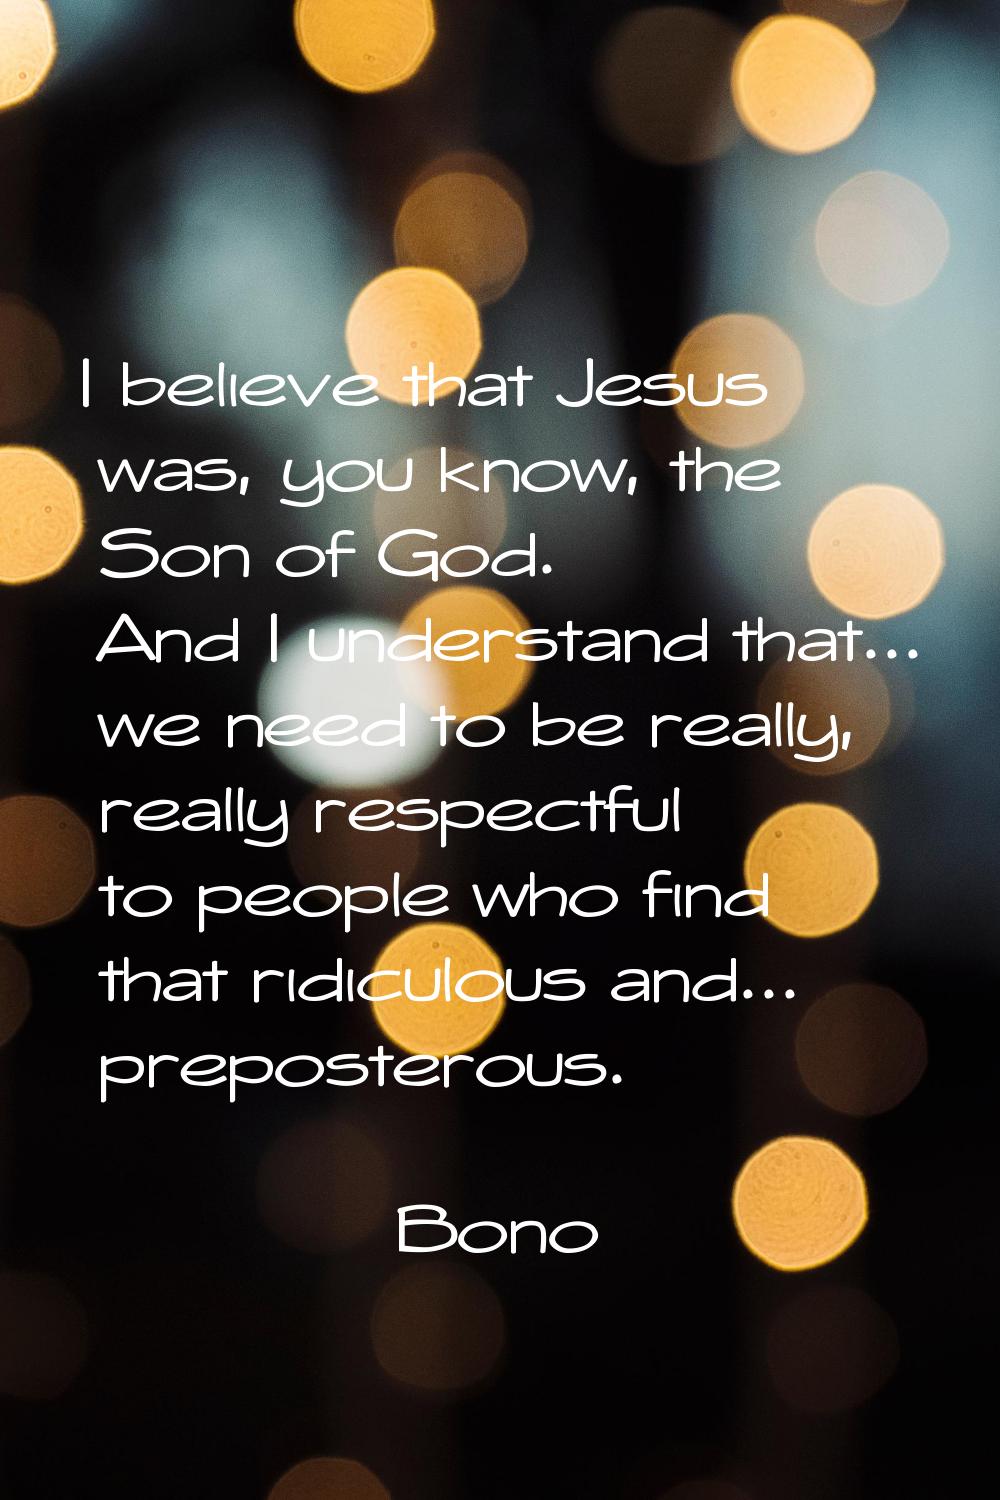 I believe that Jesus was, you know, the Son of God. And I understand that... we need to be really, 